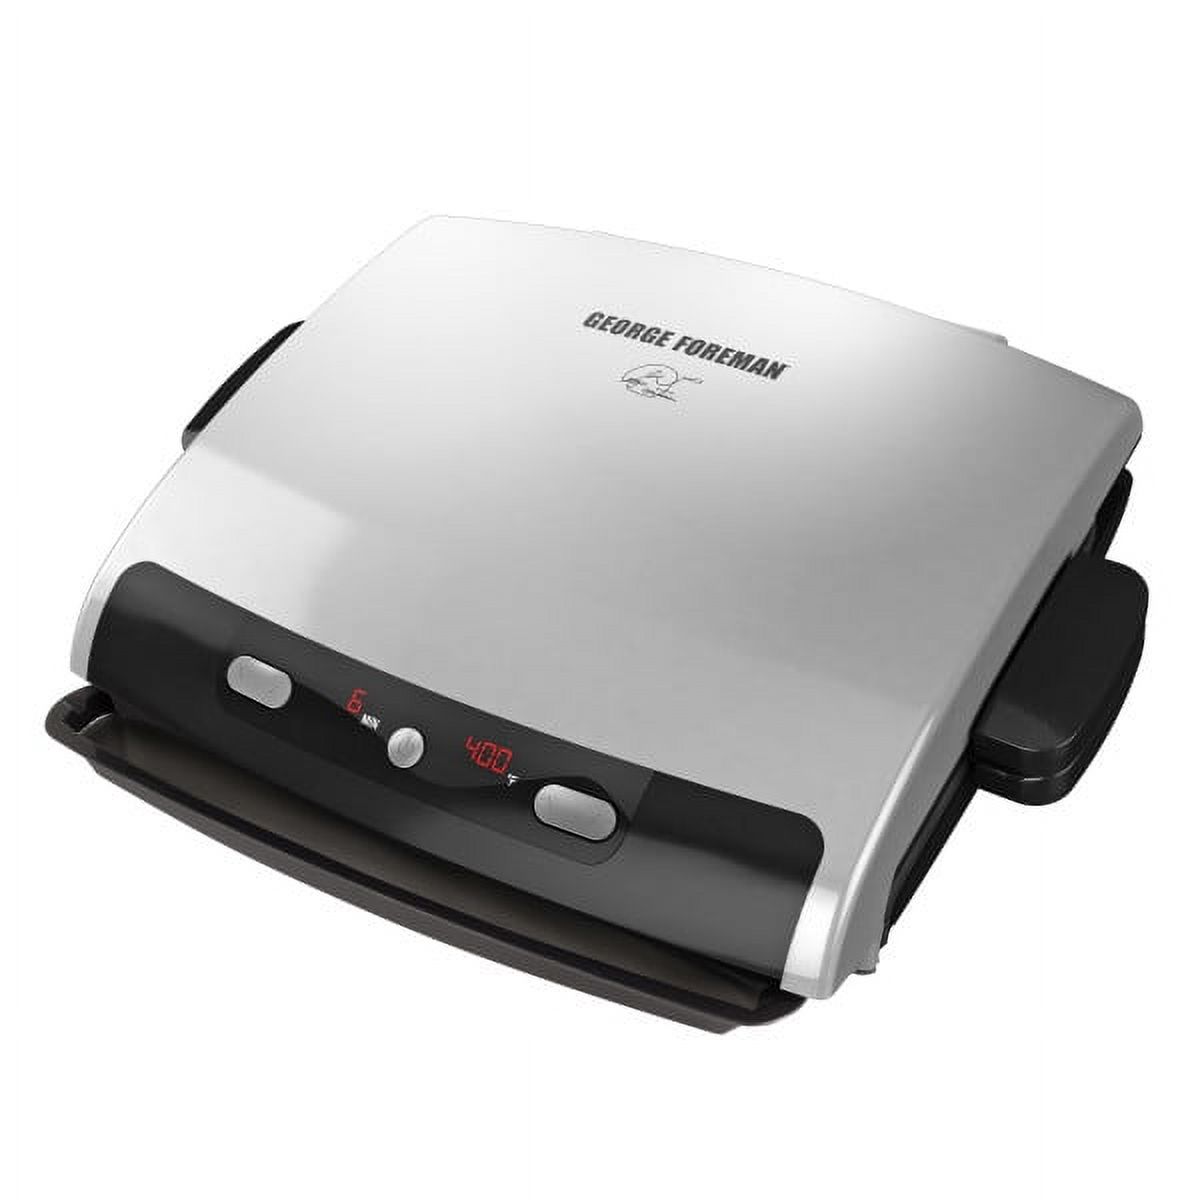 George Foreman 6-Serving Removable Plate Electric Indoor Grill and Panini Press, Silver, GRP99 - image 1 of 6